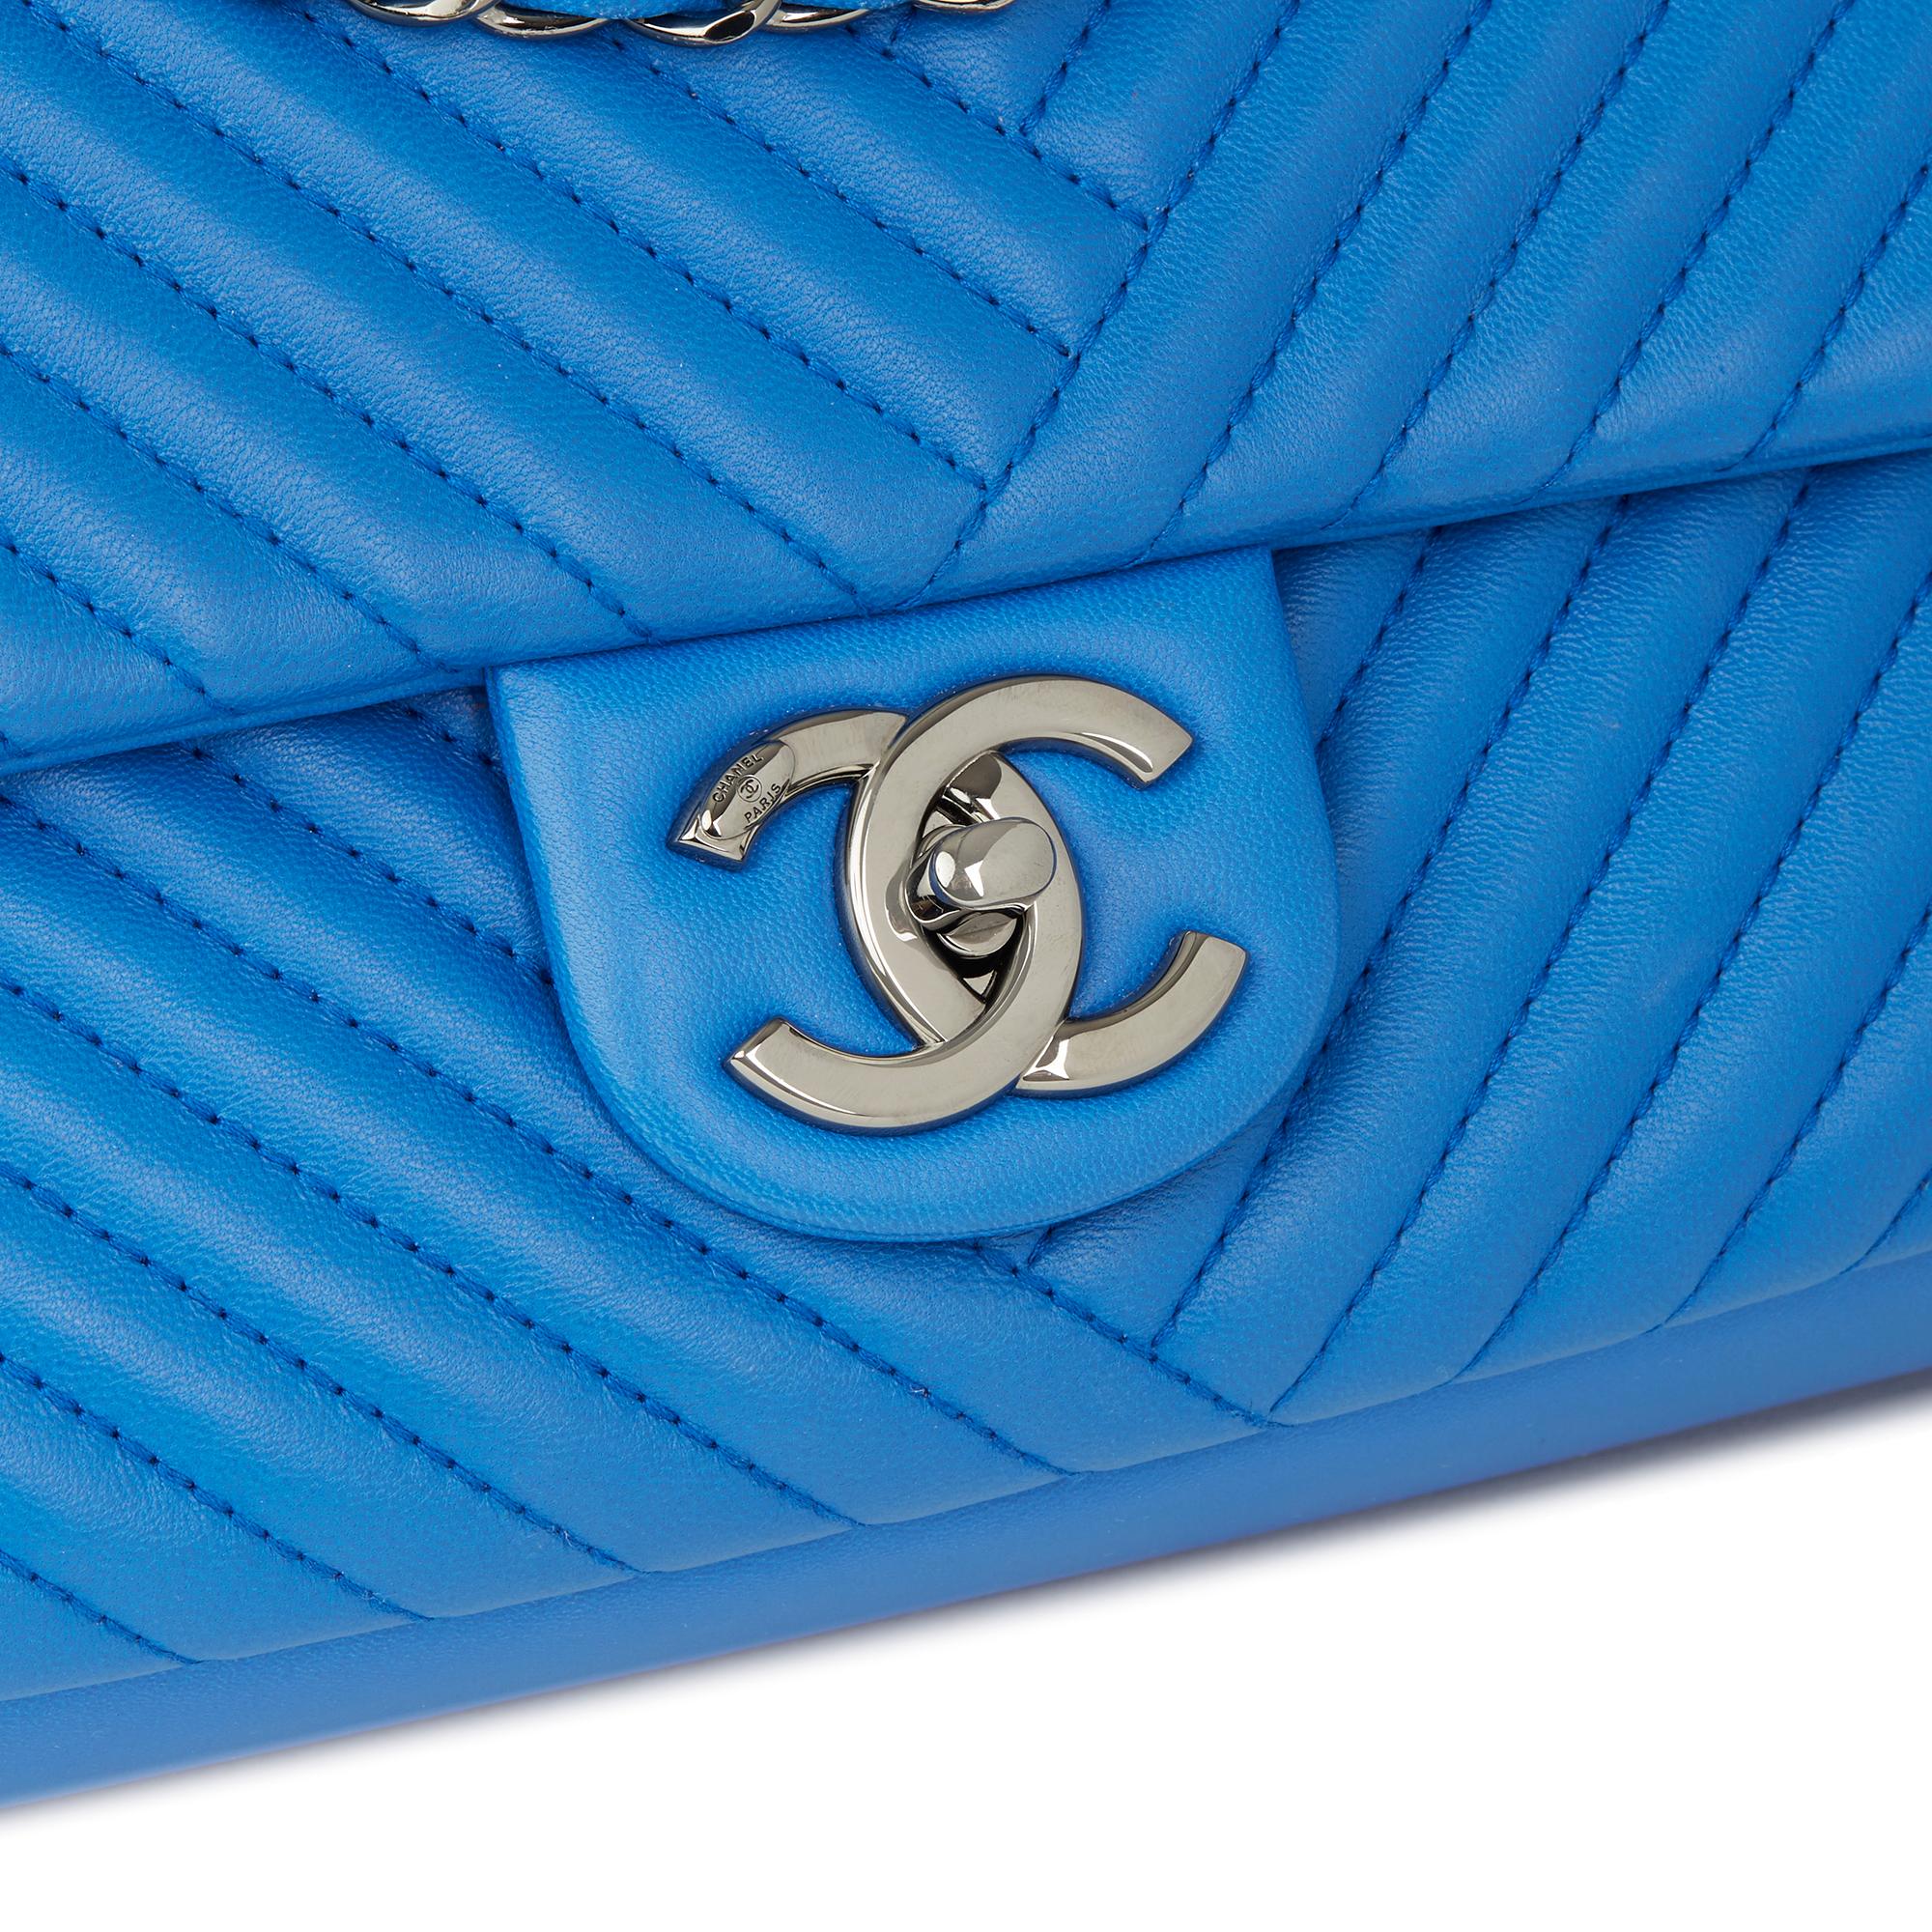 2016 Chanel Blue Chevron Quilted Lambskin Large CC Crossing Flap Bag In Excellent Condition In Bishop's Stortford, Hertfordshire